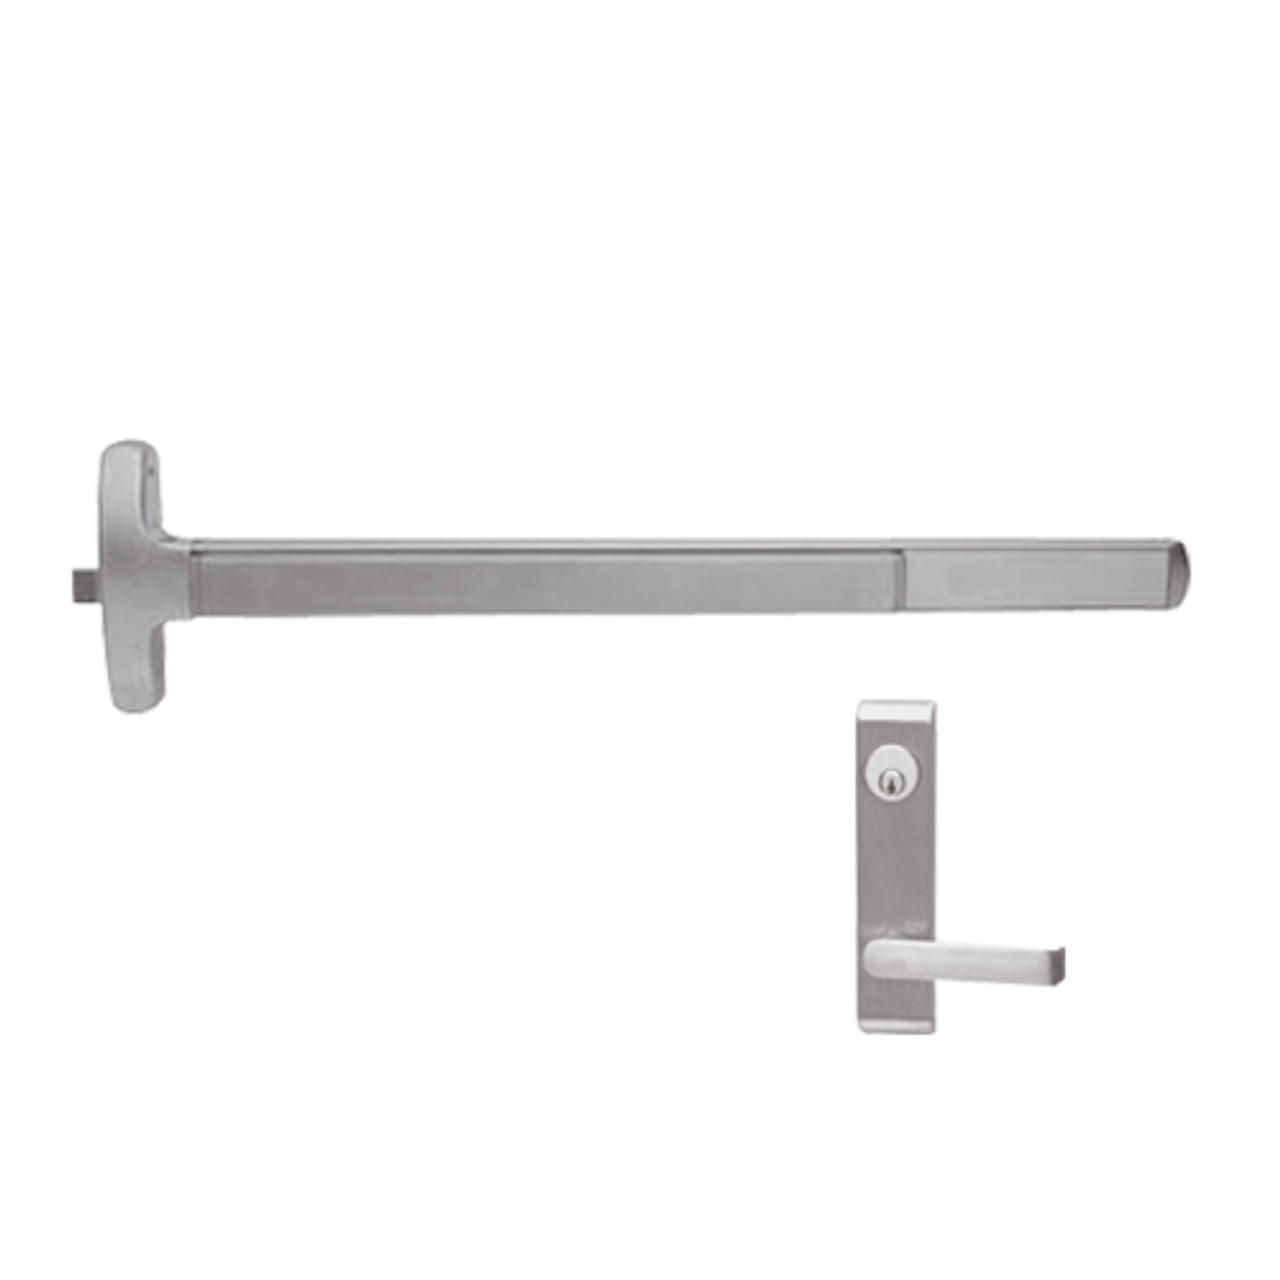 F-24-R-L-DANE-US32D-3-RHR Falcon Exit Device in Satin Stainless Steel